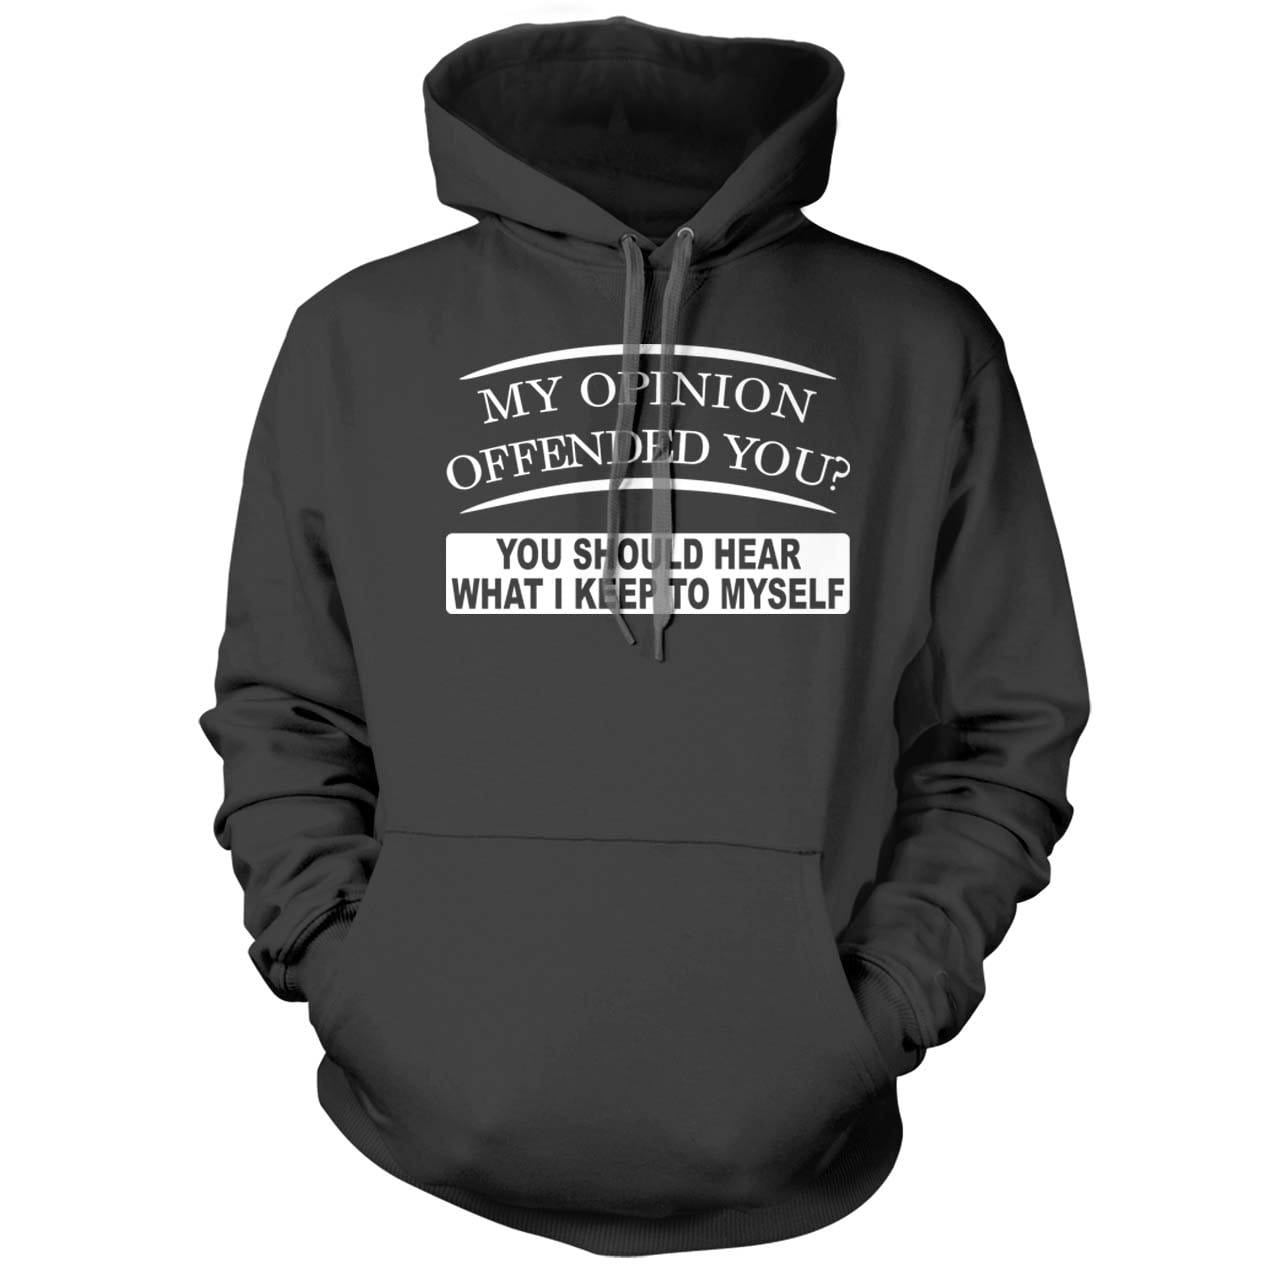 # MY OPINION OFFENDED YOU BLACK HOODED SWEATSHIRT